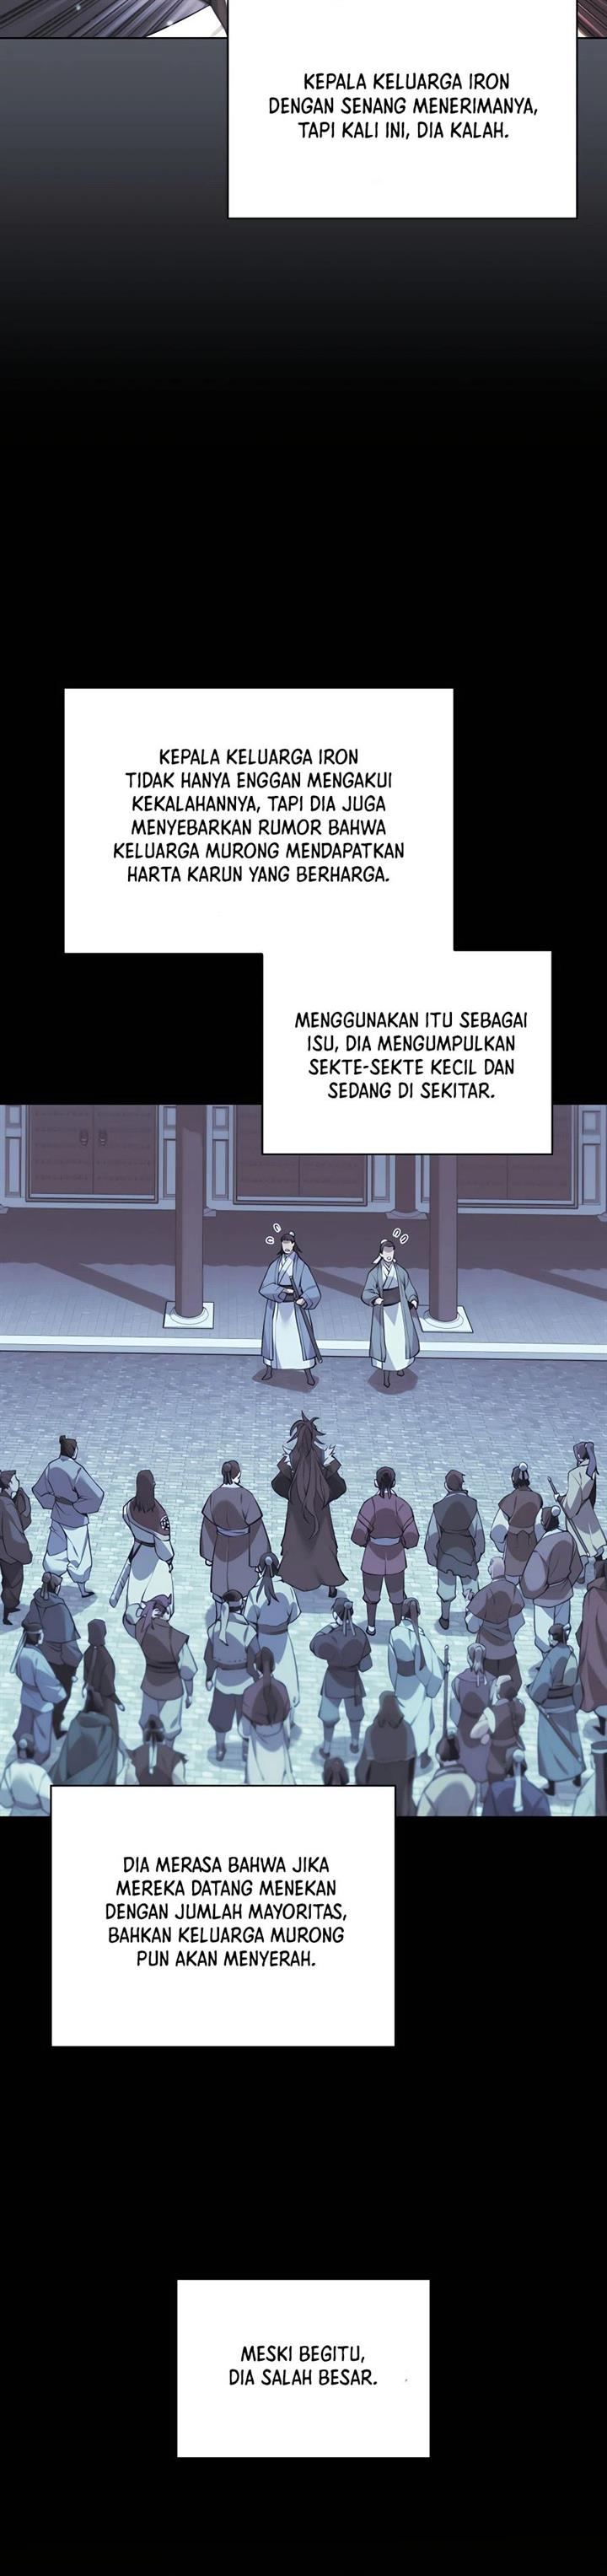 Records of the Swordsman Scholar Chapter 38